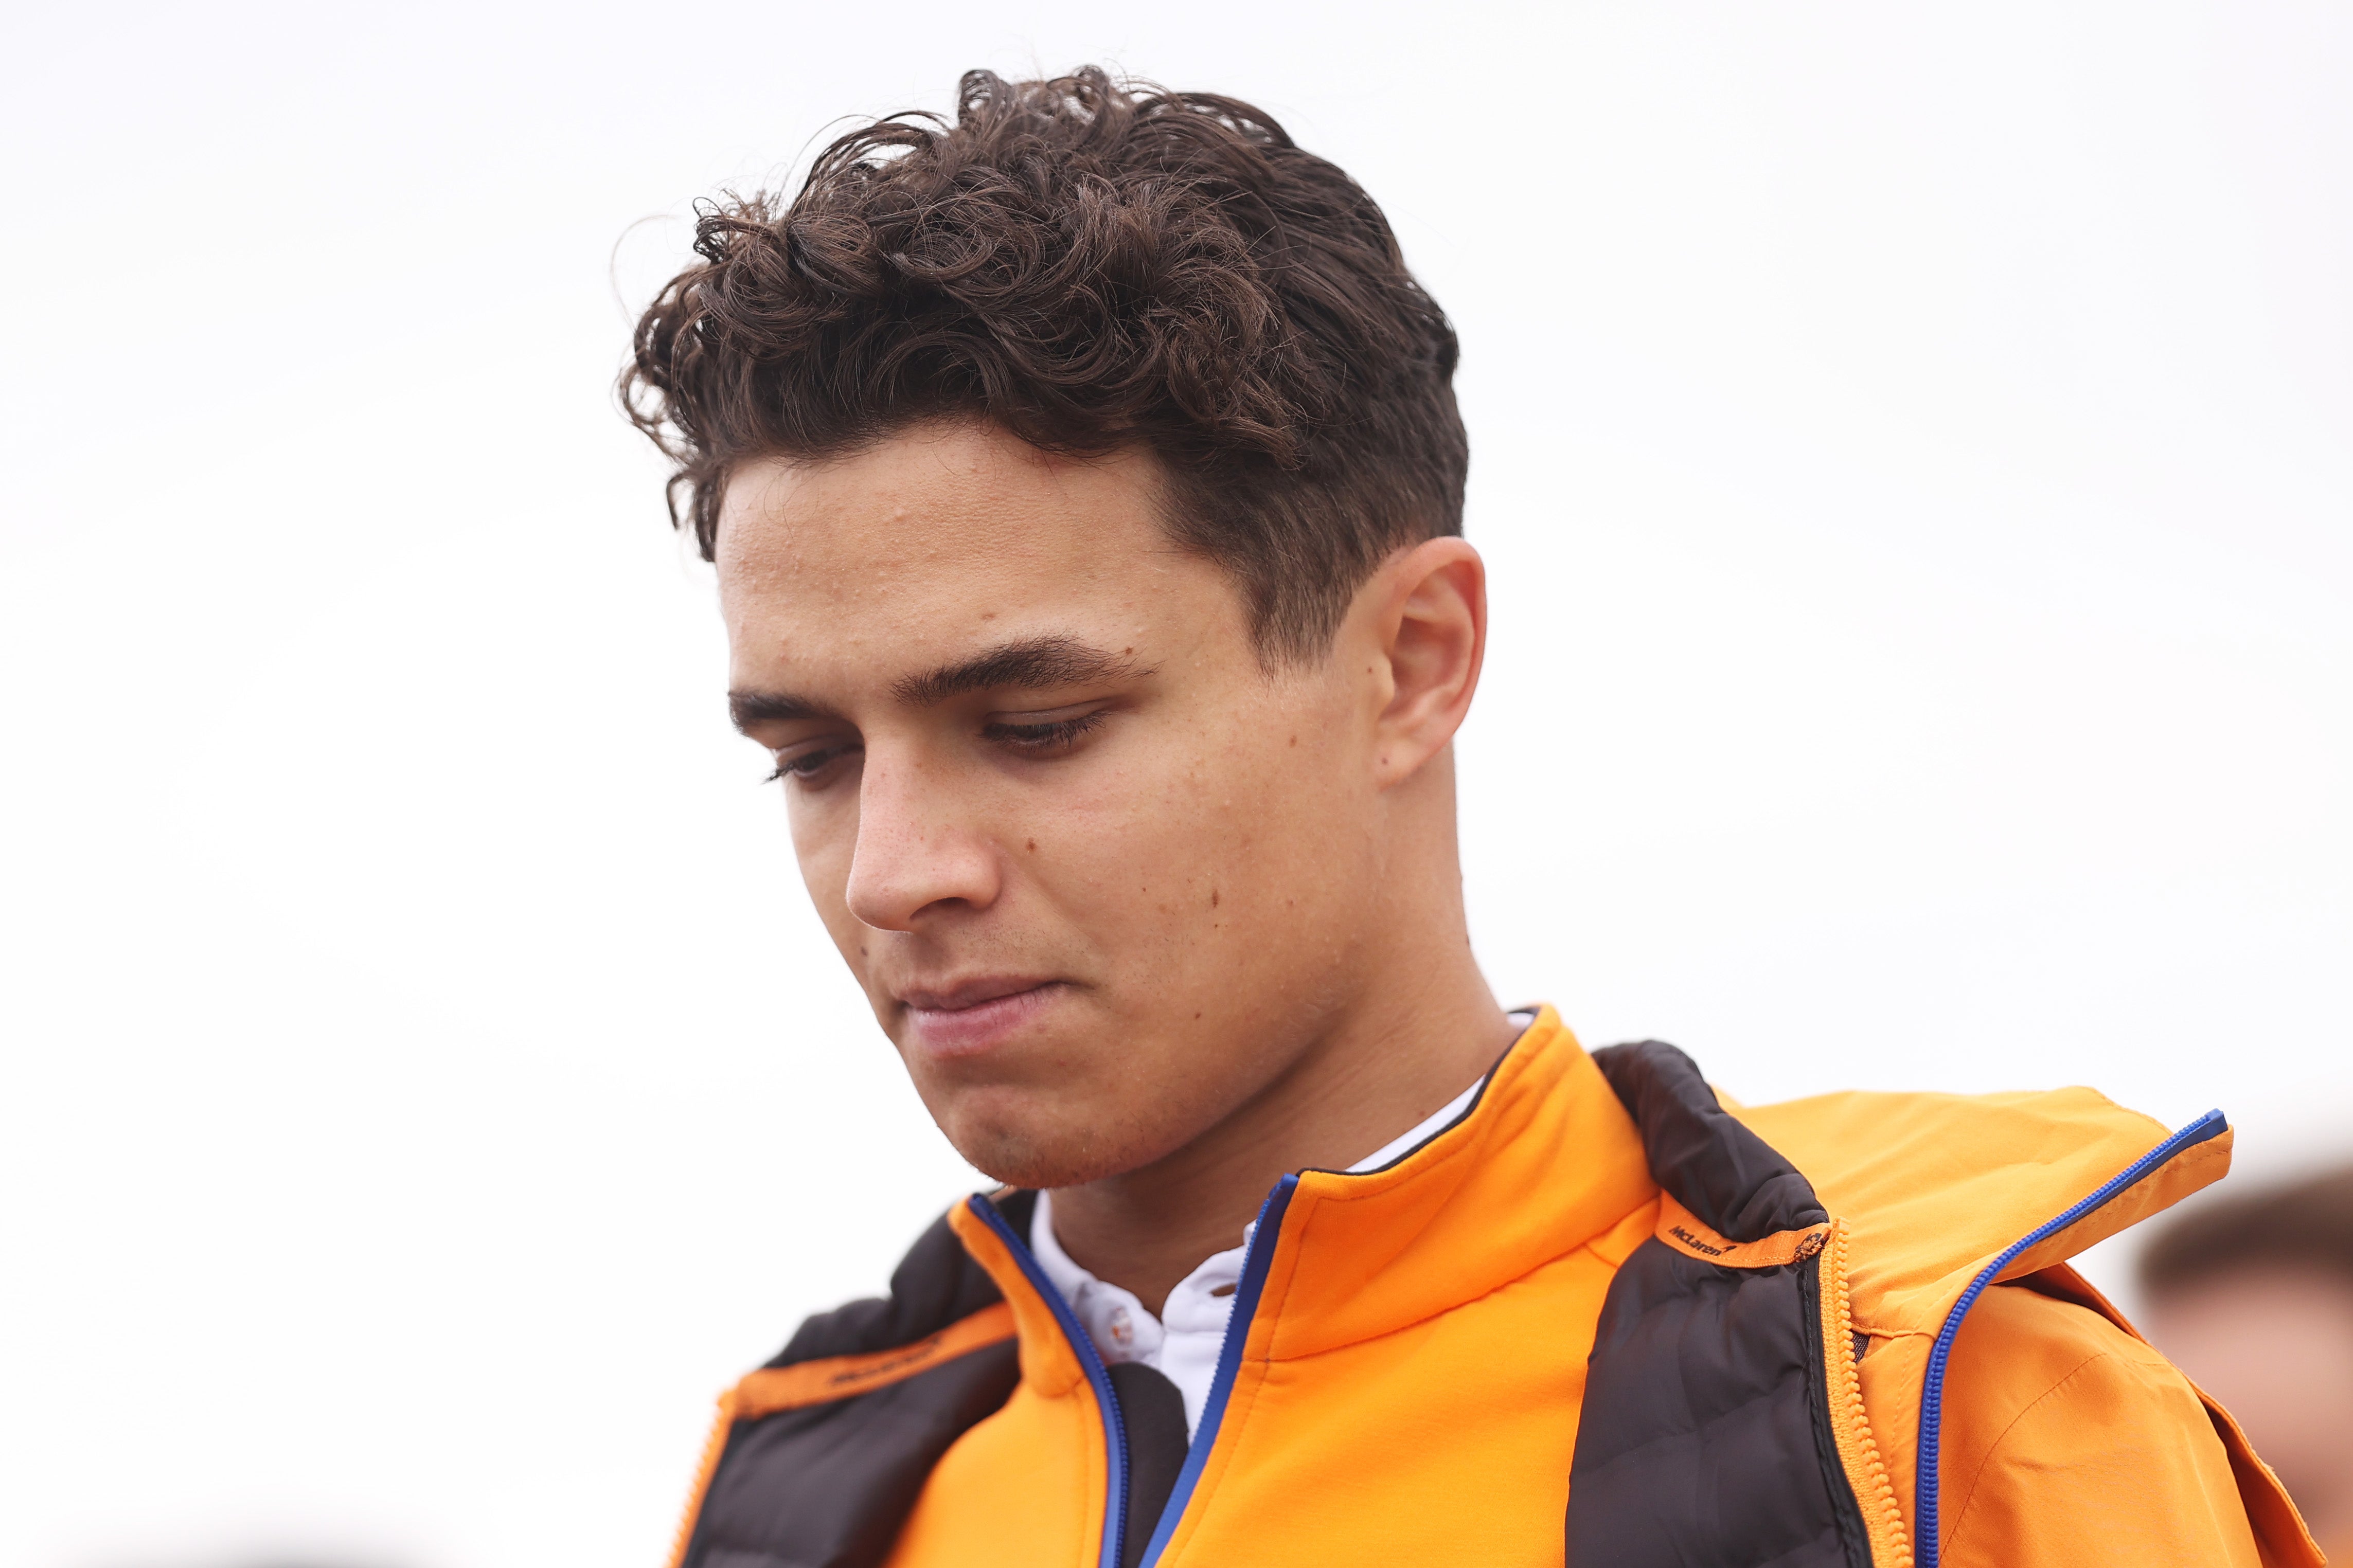 Lando Norris will race in front of home fans at Silverstone this weekend for just the second time